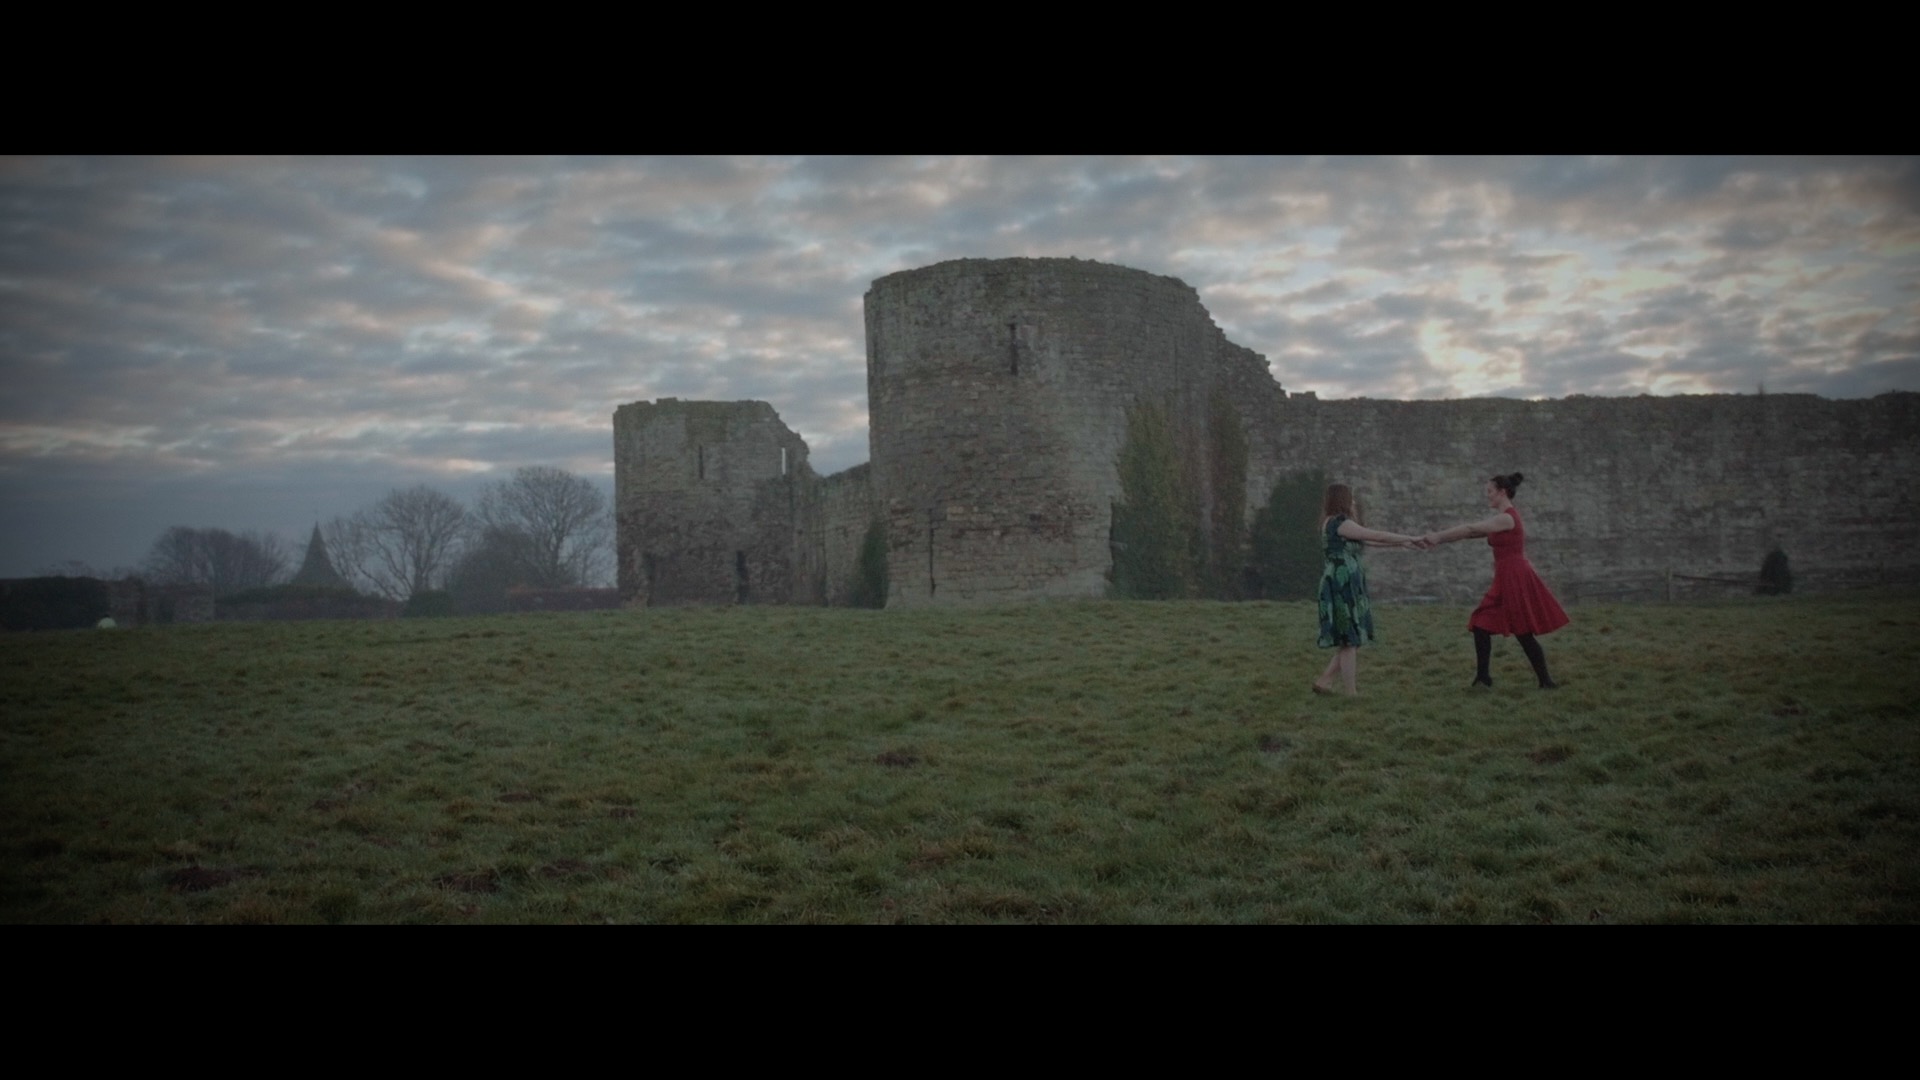 Two women dancing at Pevensey Castle, East Sussex, cared for by English Heritage.